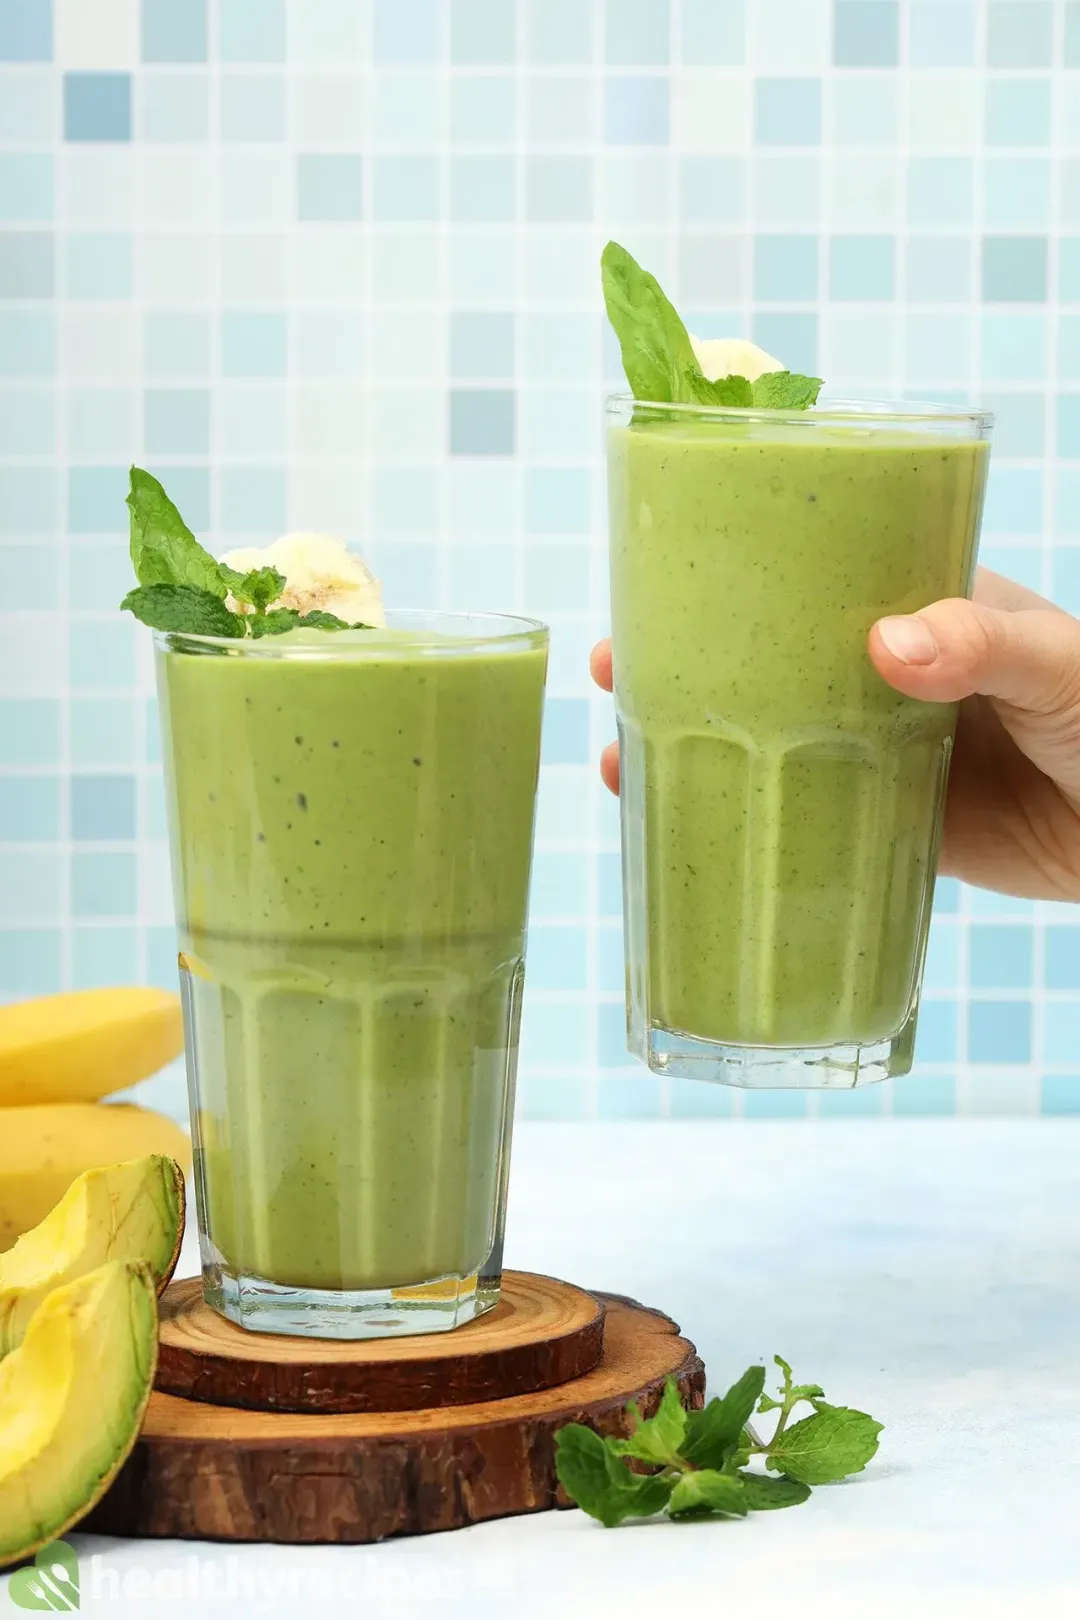 How to Store Leftover avocado spinach smoothie